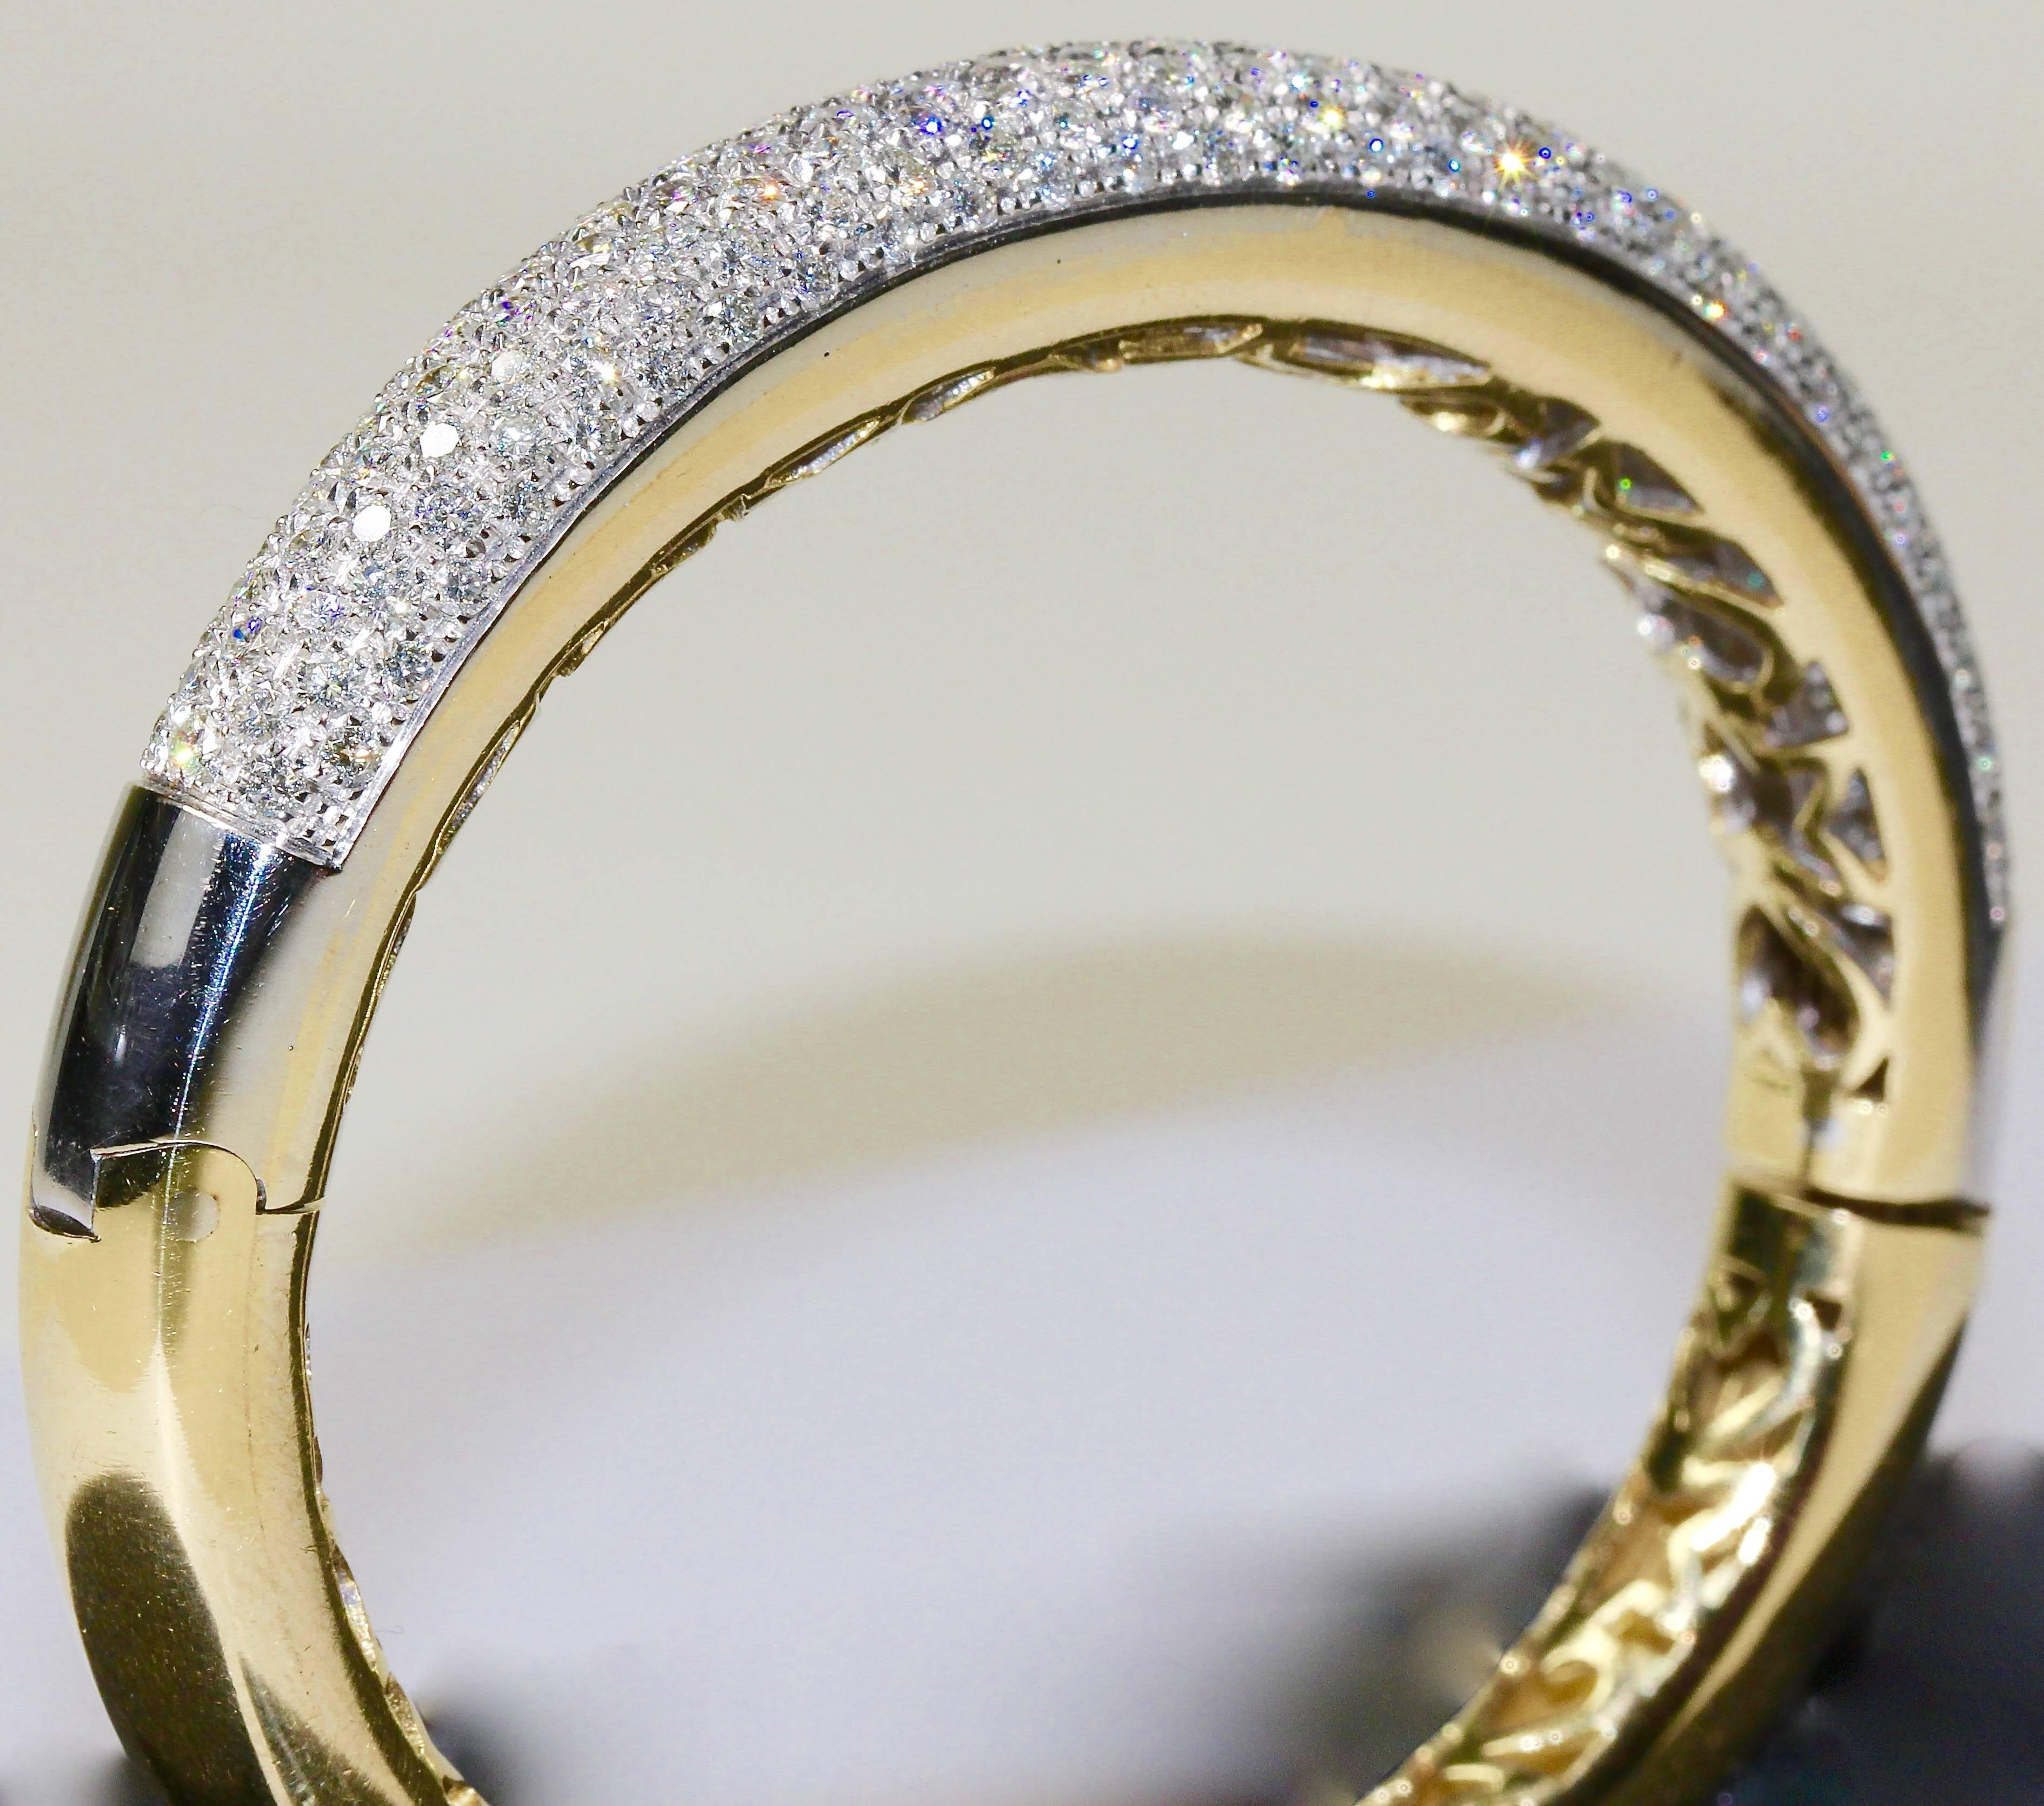 Modern Bangle, 18k Gold, 55.8 gram Set with 8.10ct Diamonds, with Certificate